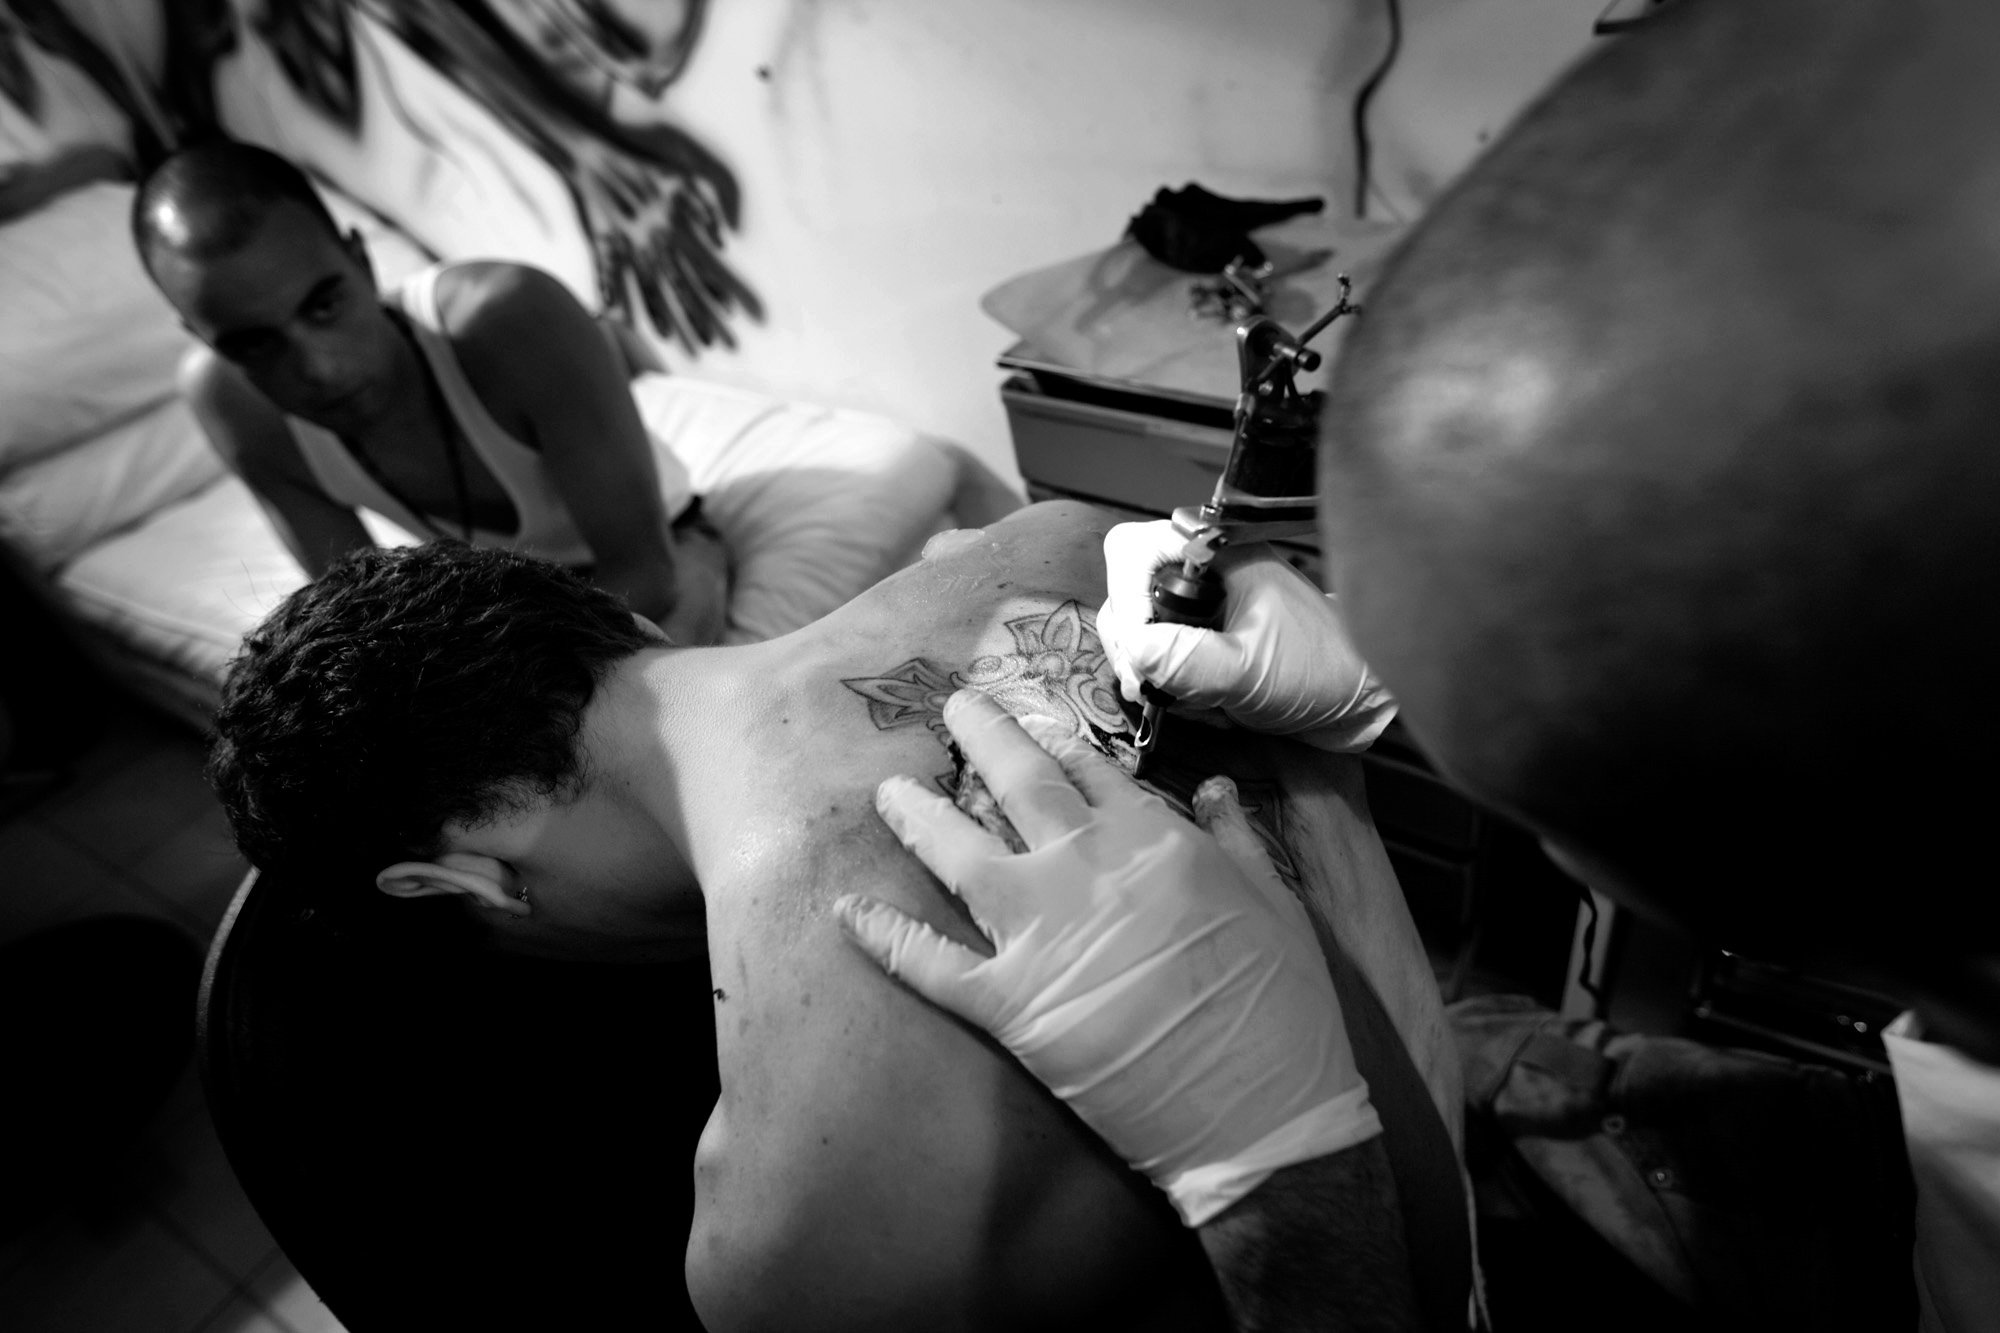  Jehad Nassif creates Christian tattoos for his clients at the Survivor Tattoo Parlor in East Beirut, Lebanon, on April 14, 2008. In this Christian section of the city, most of Nassif's clients are young people who strongly identify with their religi